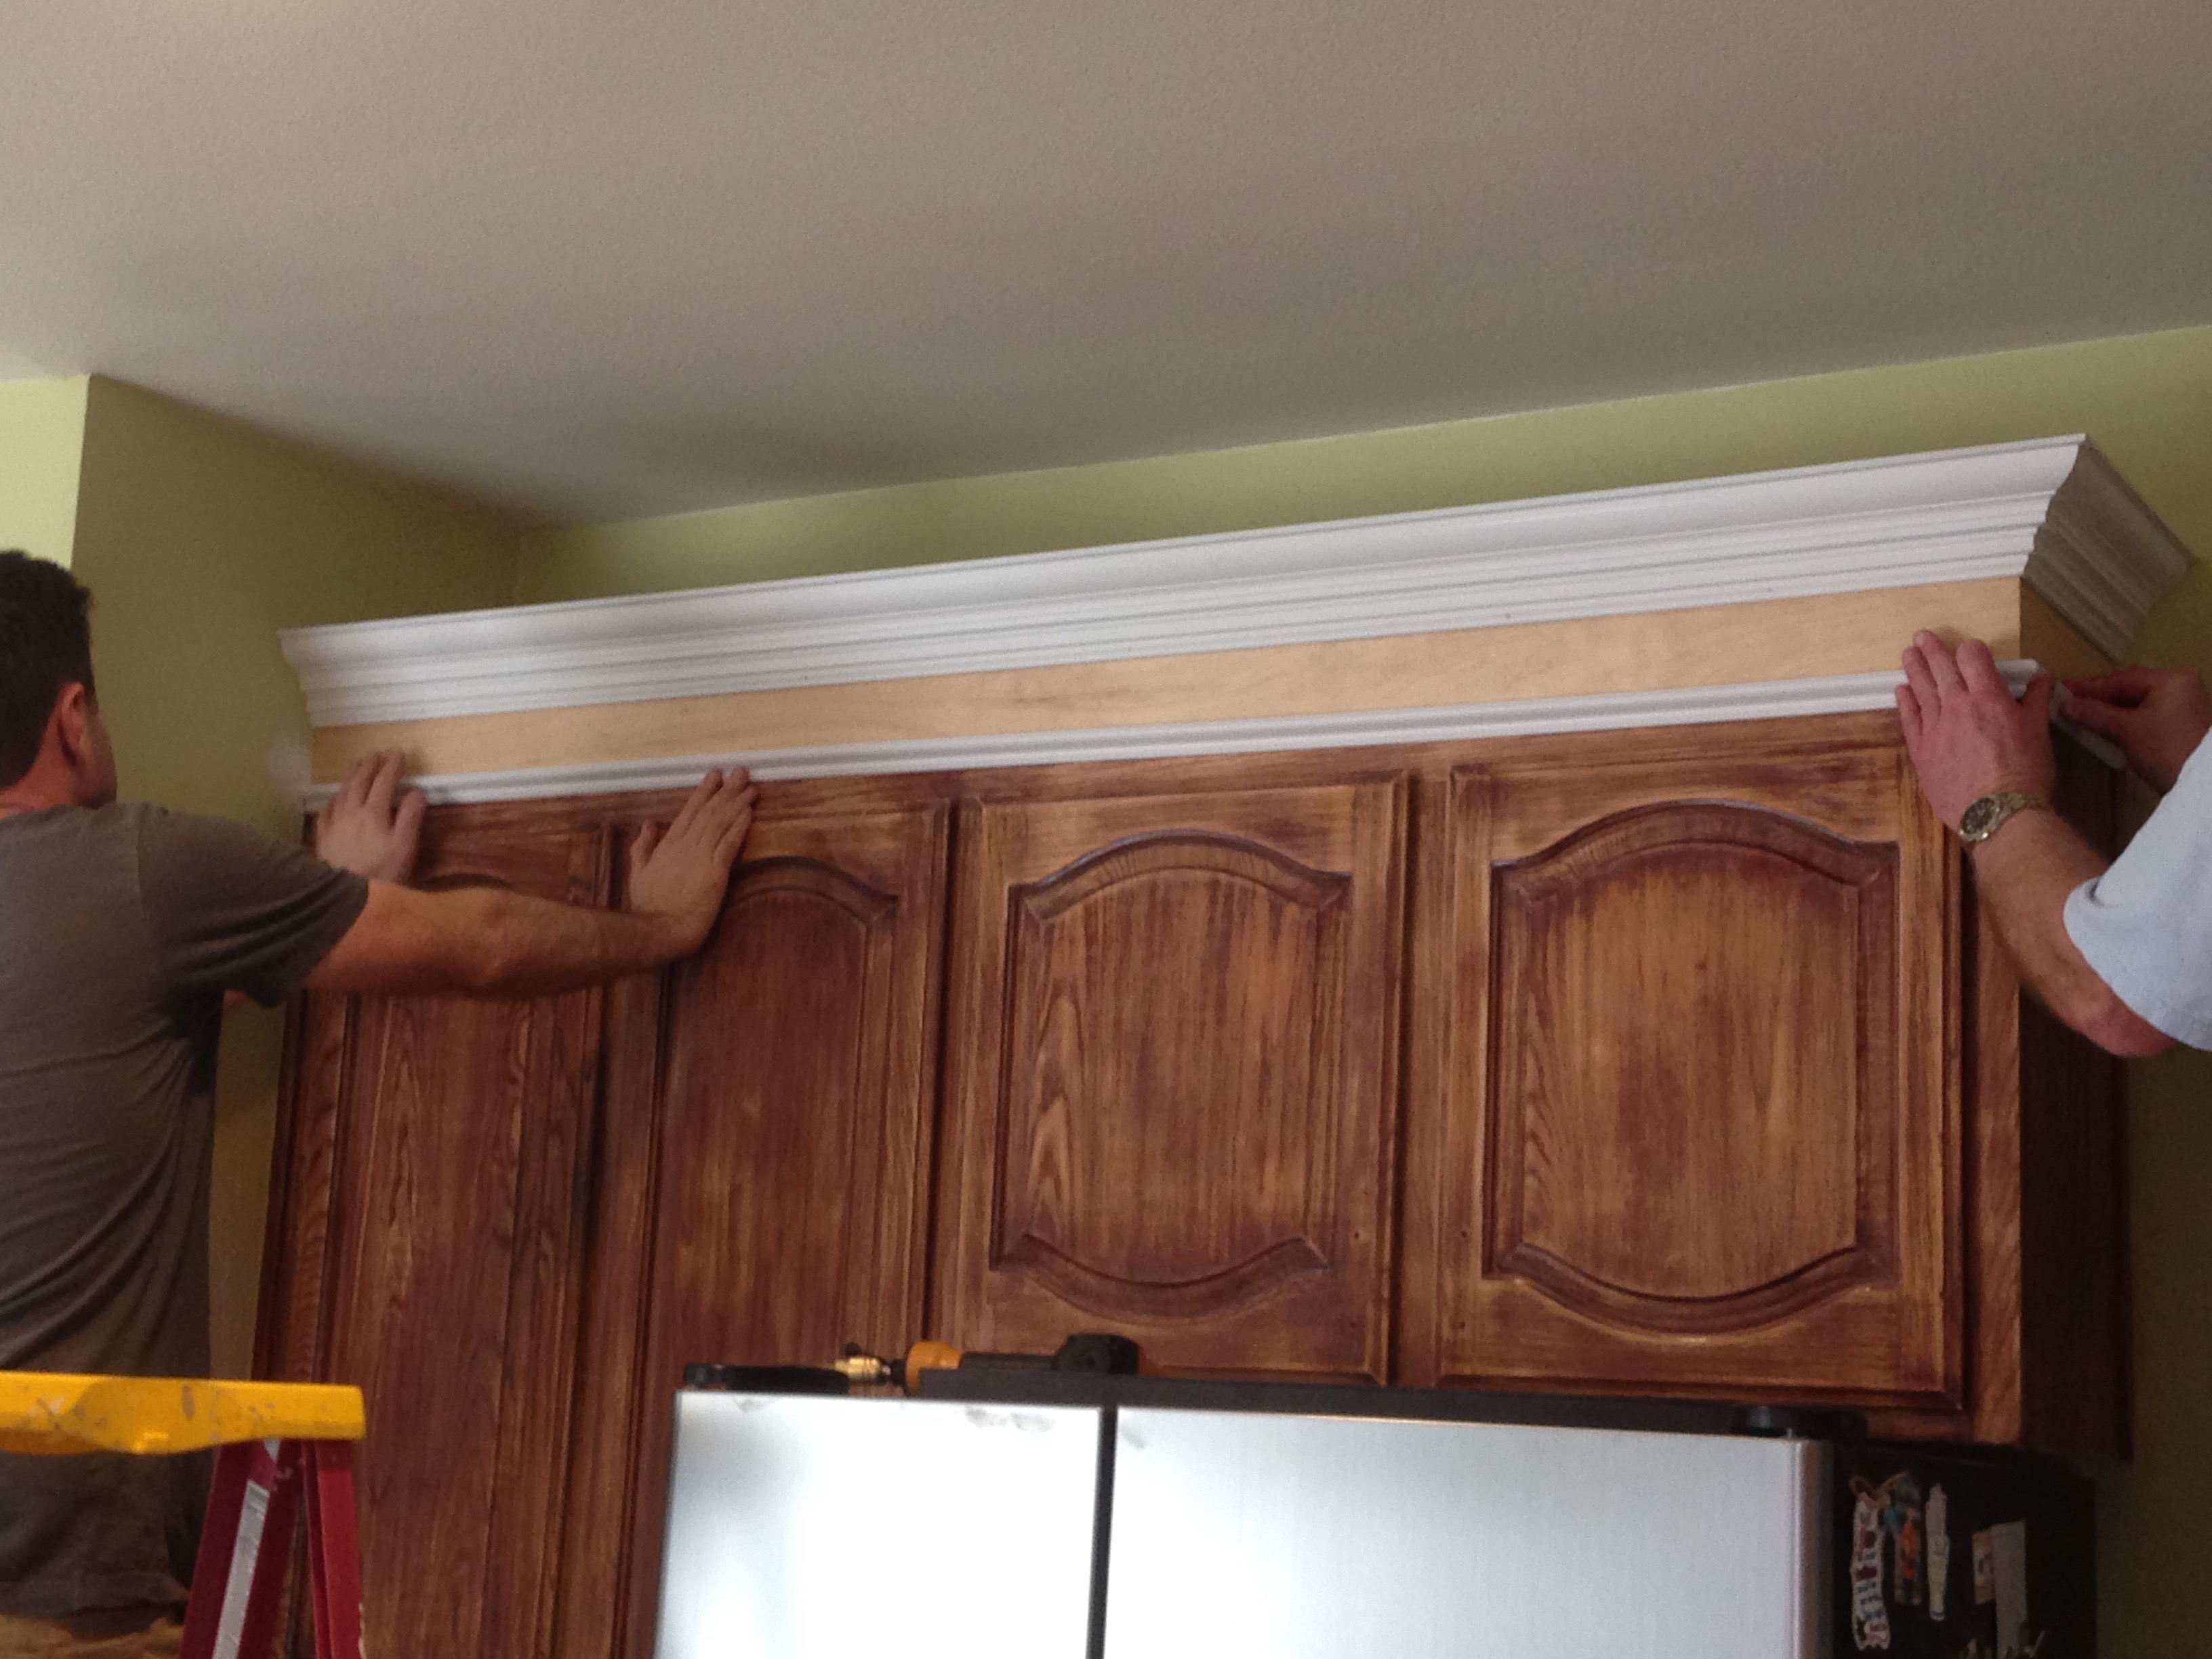 Mostly Diy Kitchen Cabinet Transformation The Process